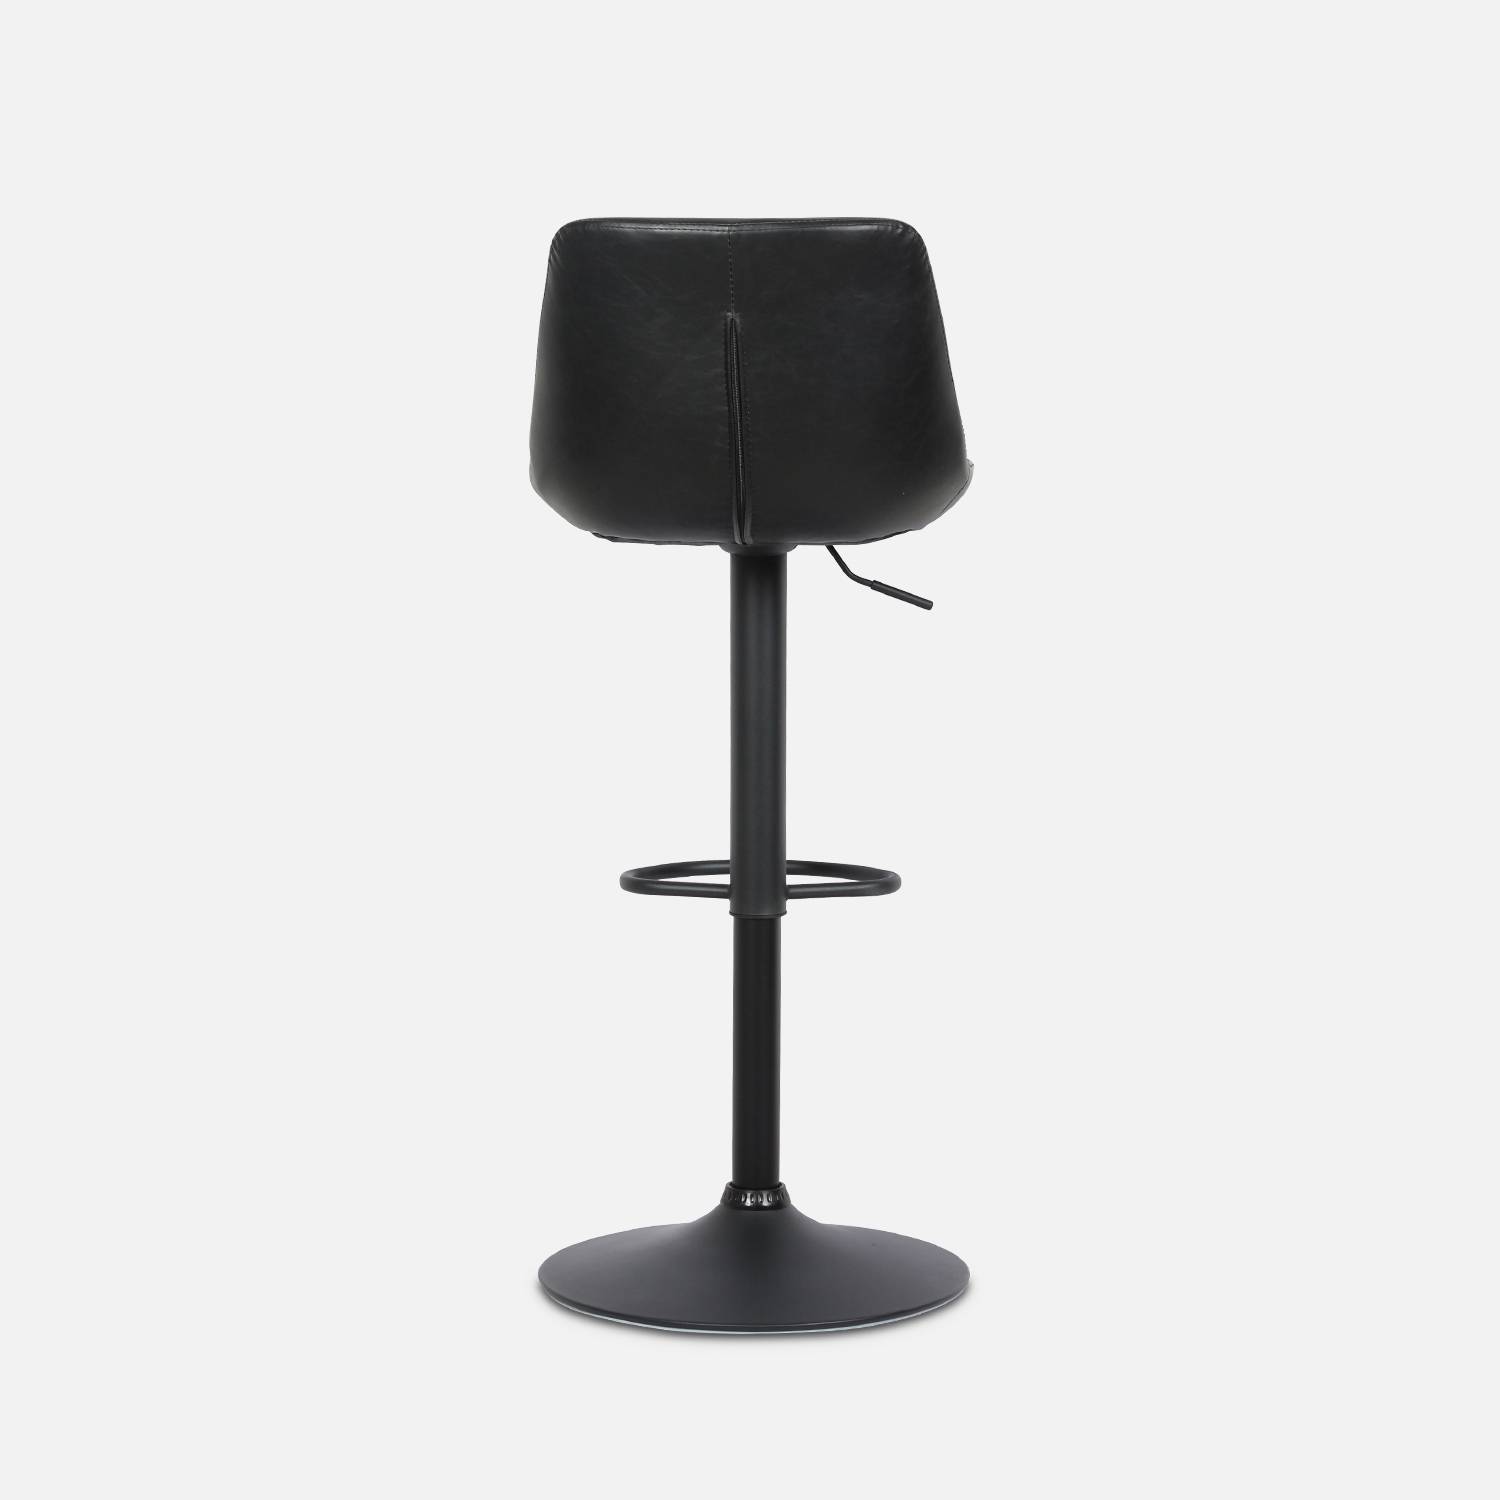 Pair of faux leather, square backrest, adjustable bar stools, seat height 61.5 - 83.5cm - Noah - Black Photo6